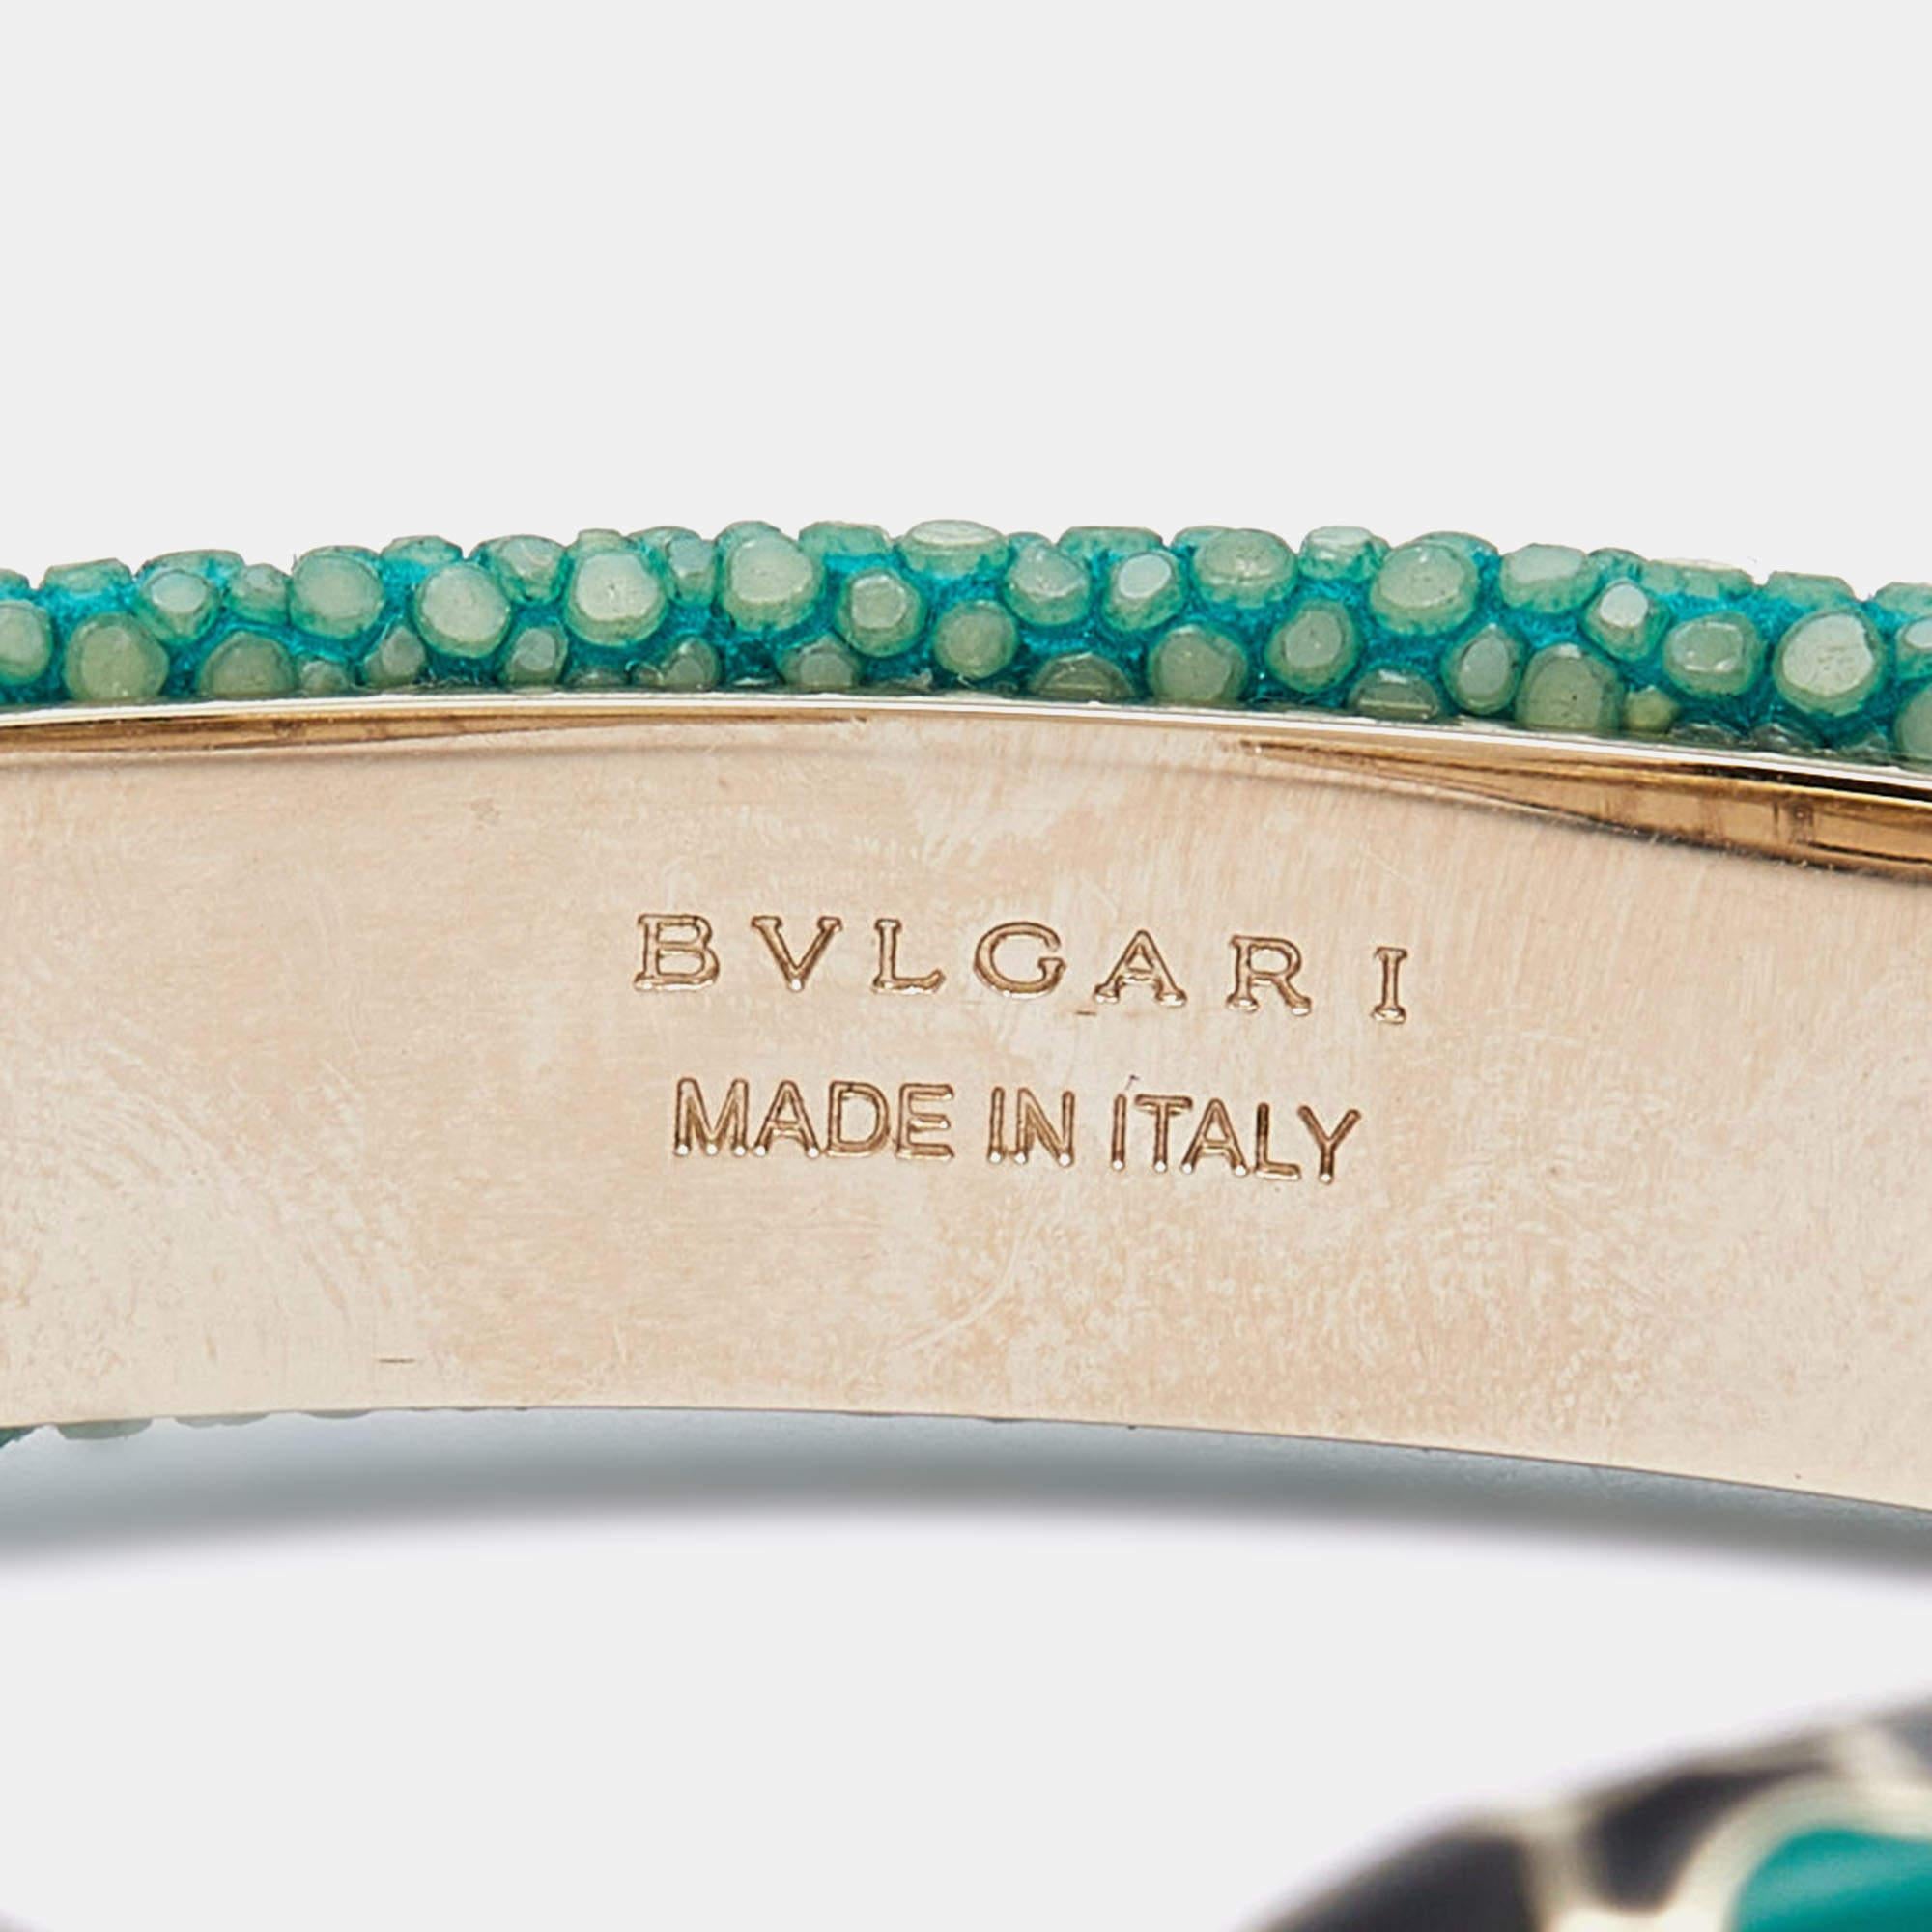 The Bvlgari Serpenti Forever bracelet is a luxurious and elegant accessory. It features a green galuchat leather band with gold-plated accents, showcasing the iconic Serpenti snake motif. This exquisite cuff bracelet exudes sophistication and